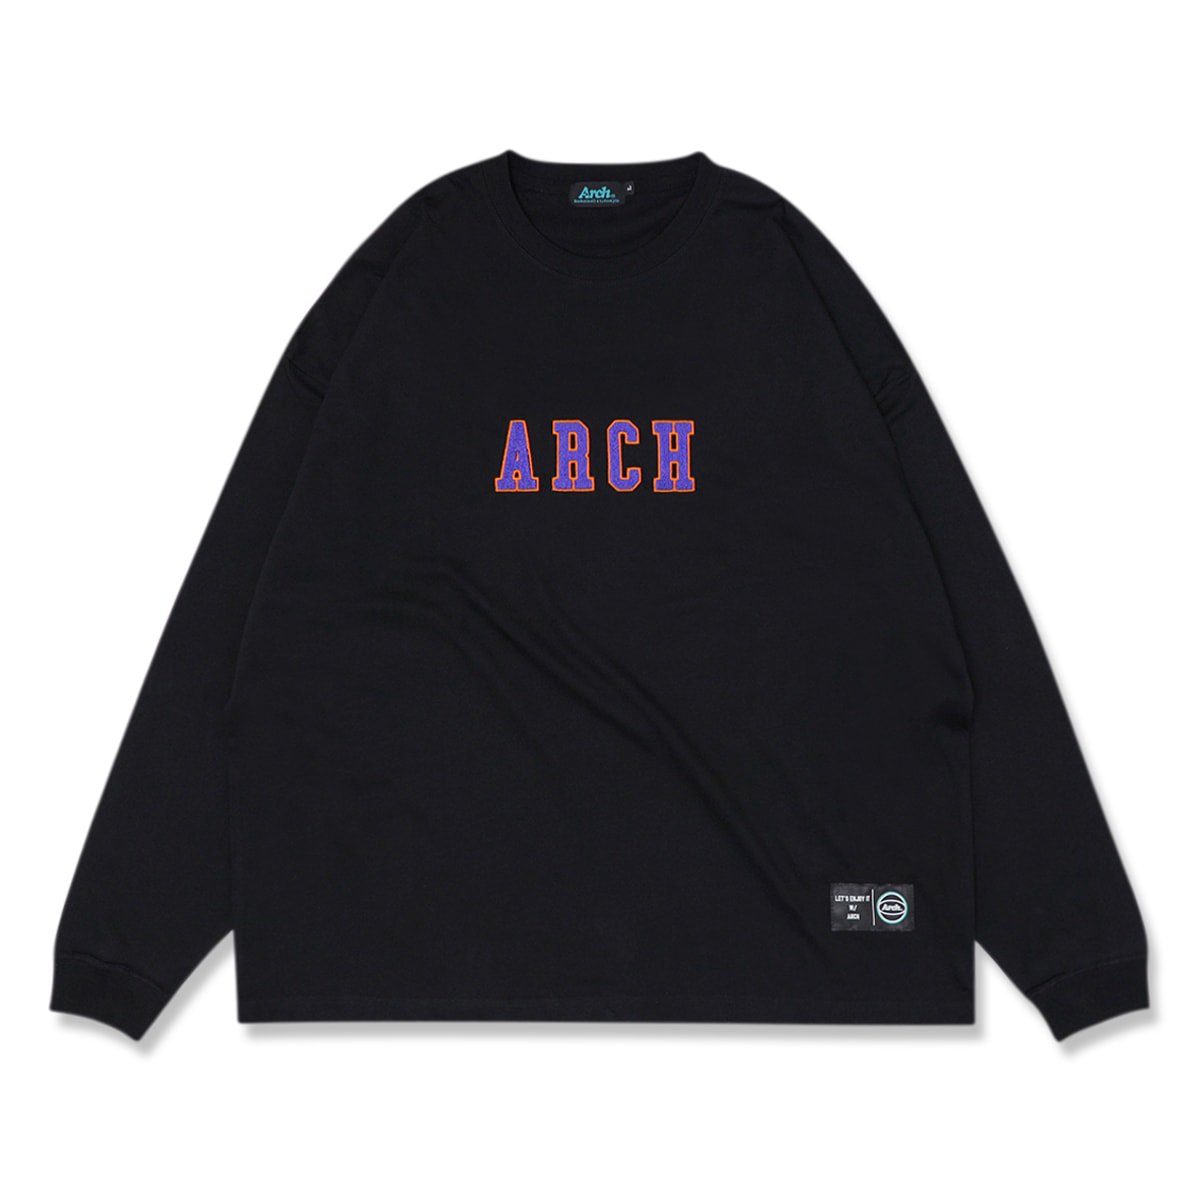 vertical embroidered wide L/S tee【black】 - Arch ☆ アーチ